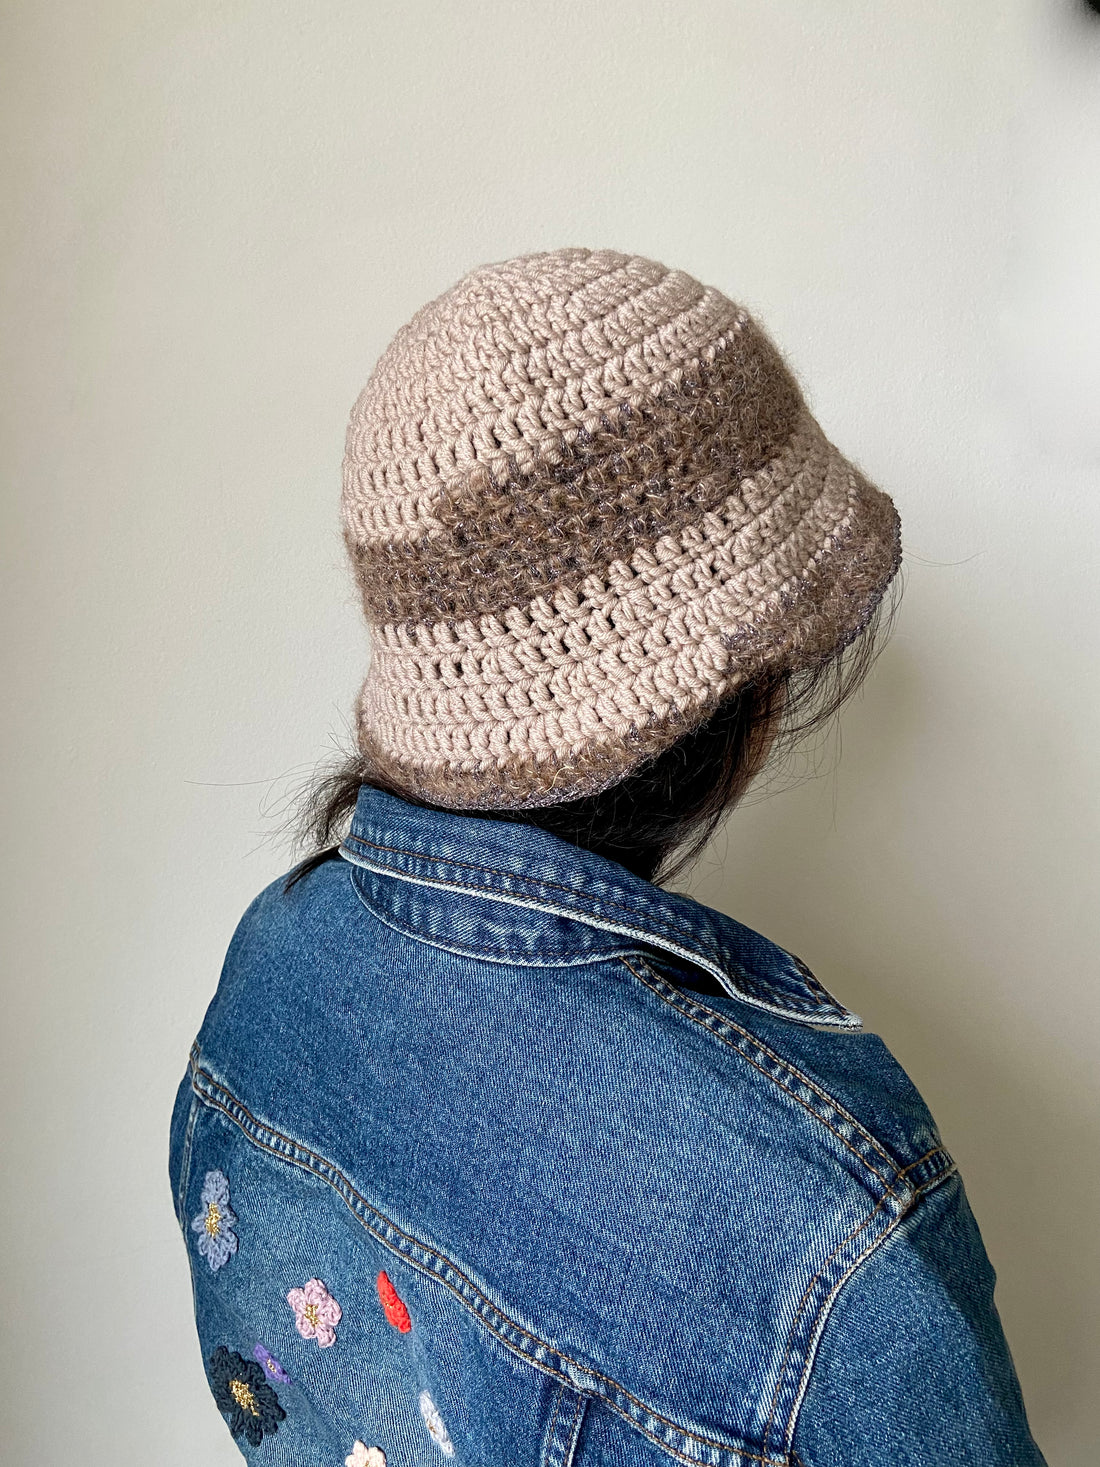 anabaum hat wooly made of merino wool in shades of beige with some matching metallic yarn for added bedazzle! size m